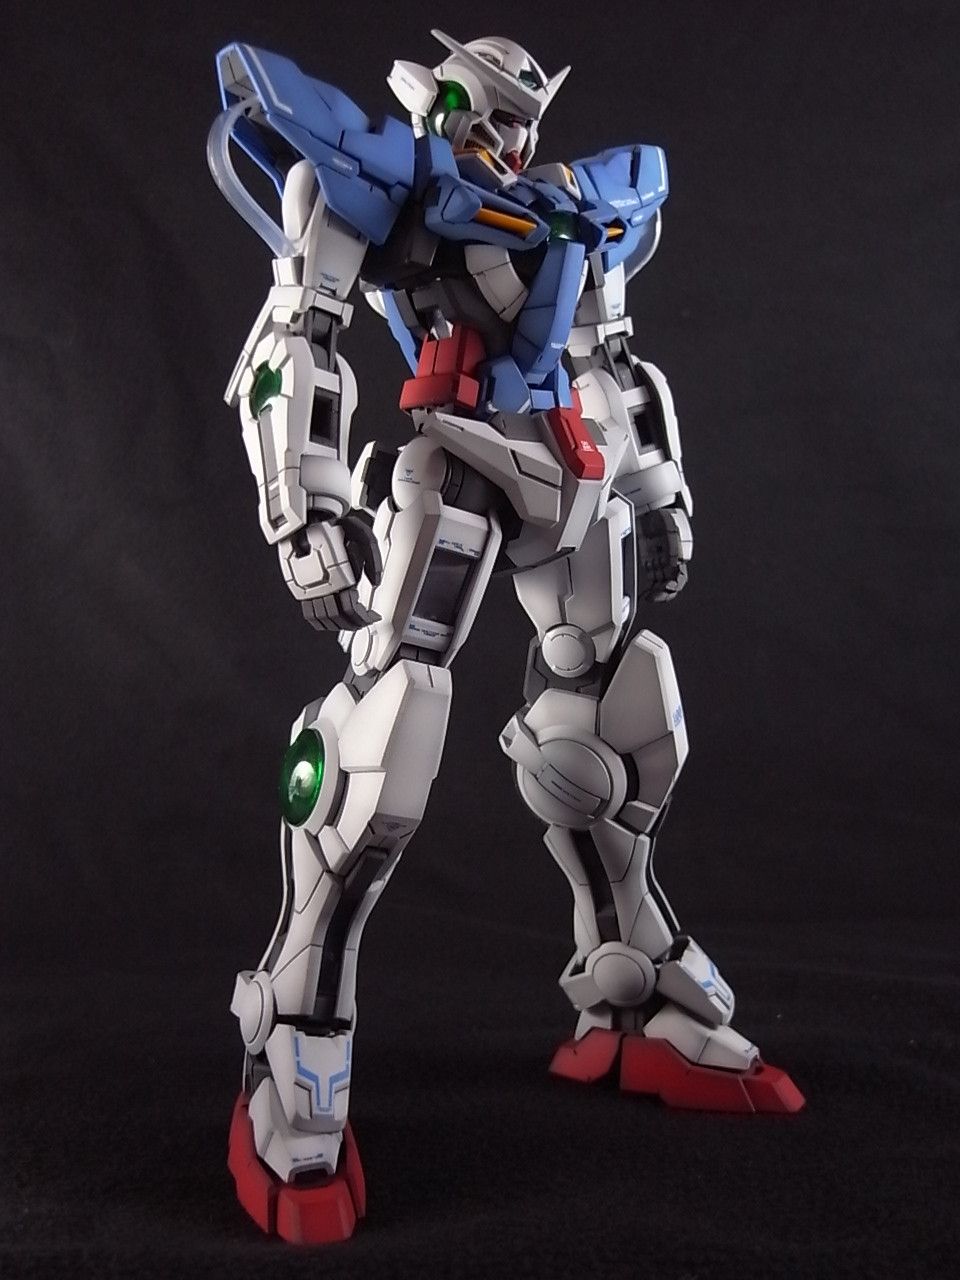 MG 1/100 Gundam Exia: Modeled by Lucier. Photoreview Wallpaper ...